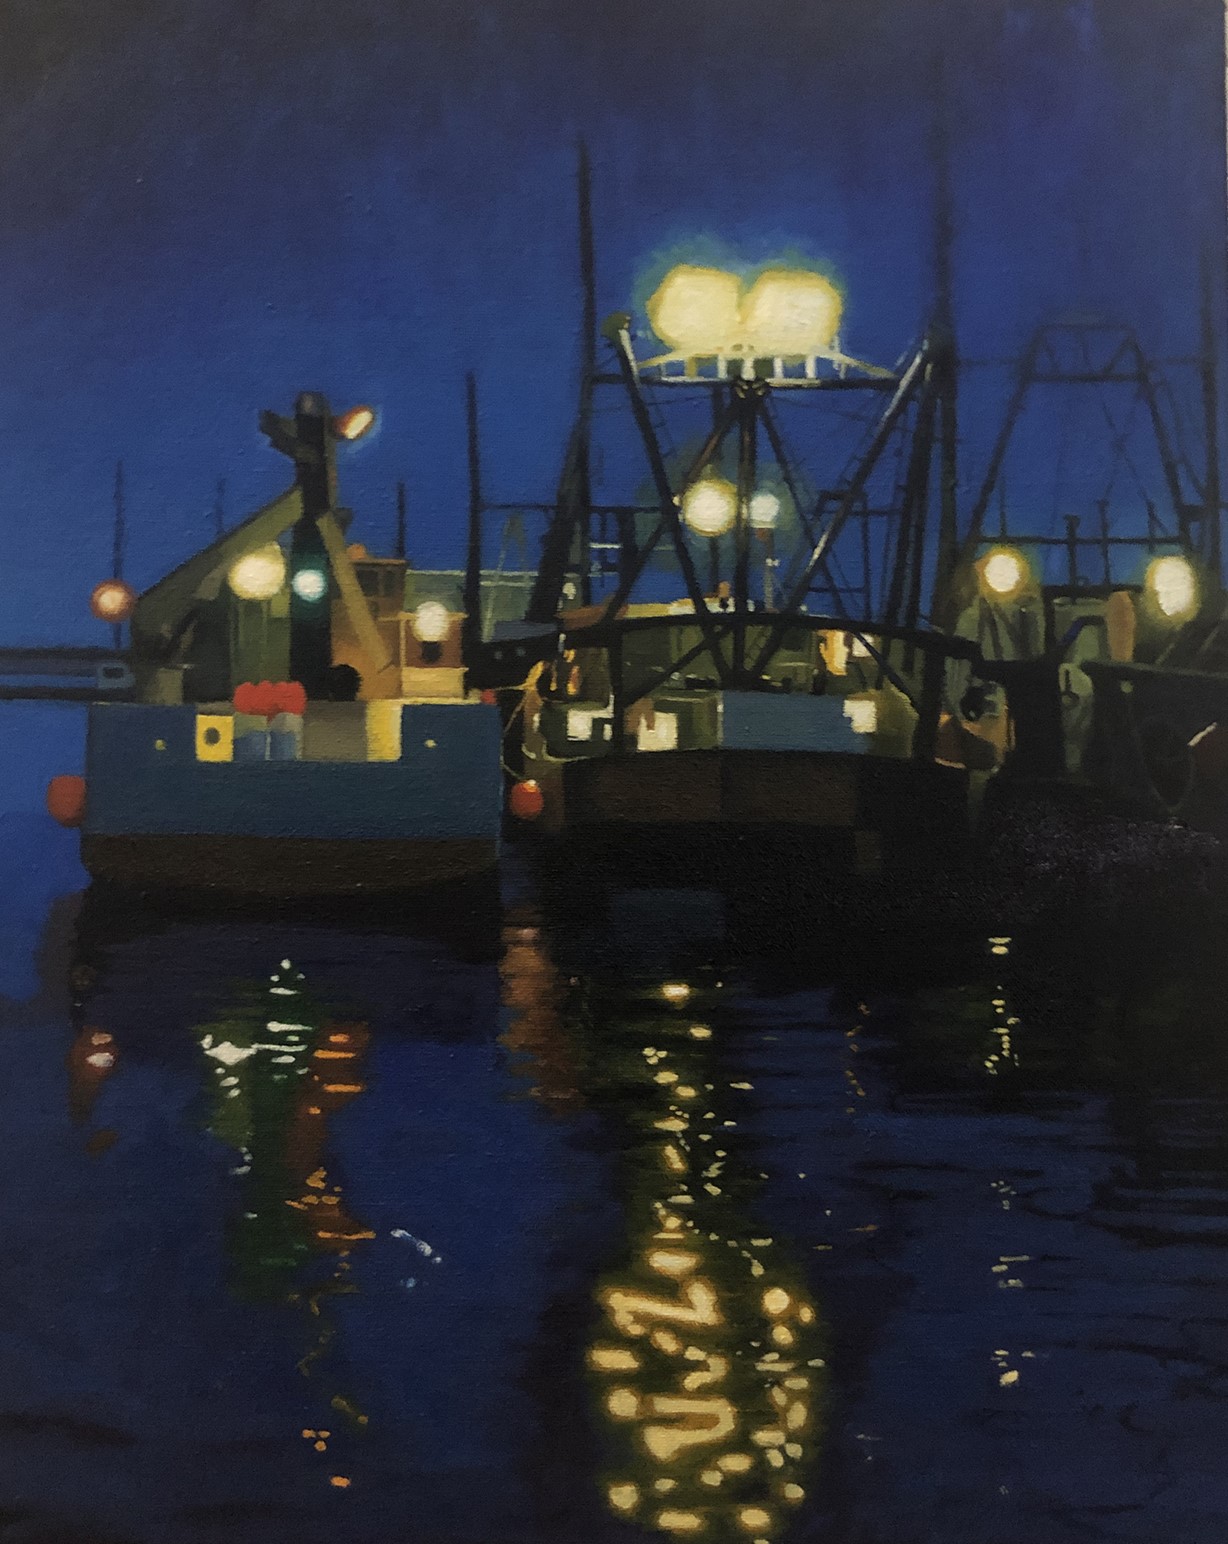 Join artist Roy Rossow for an evening of art, creativity, and observation. Explore Rossow’s exhibition “The Stars That Guide Us,” and participate in a painting workshop with the artist himself overlooking the New Bedford waterfront at sunset. 